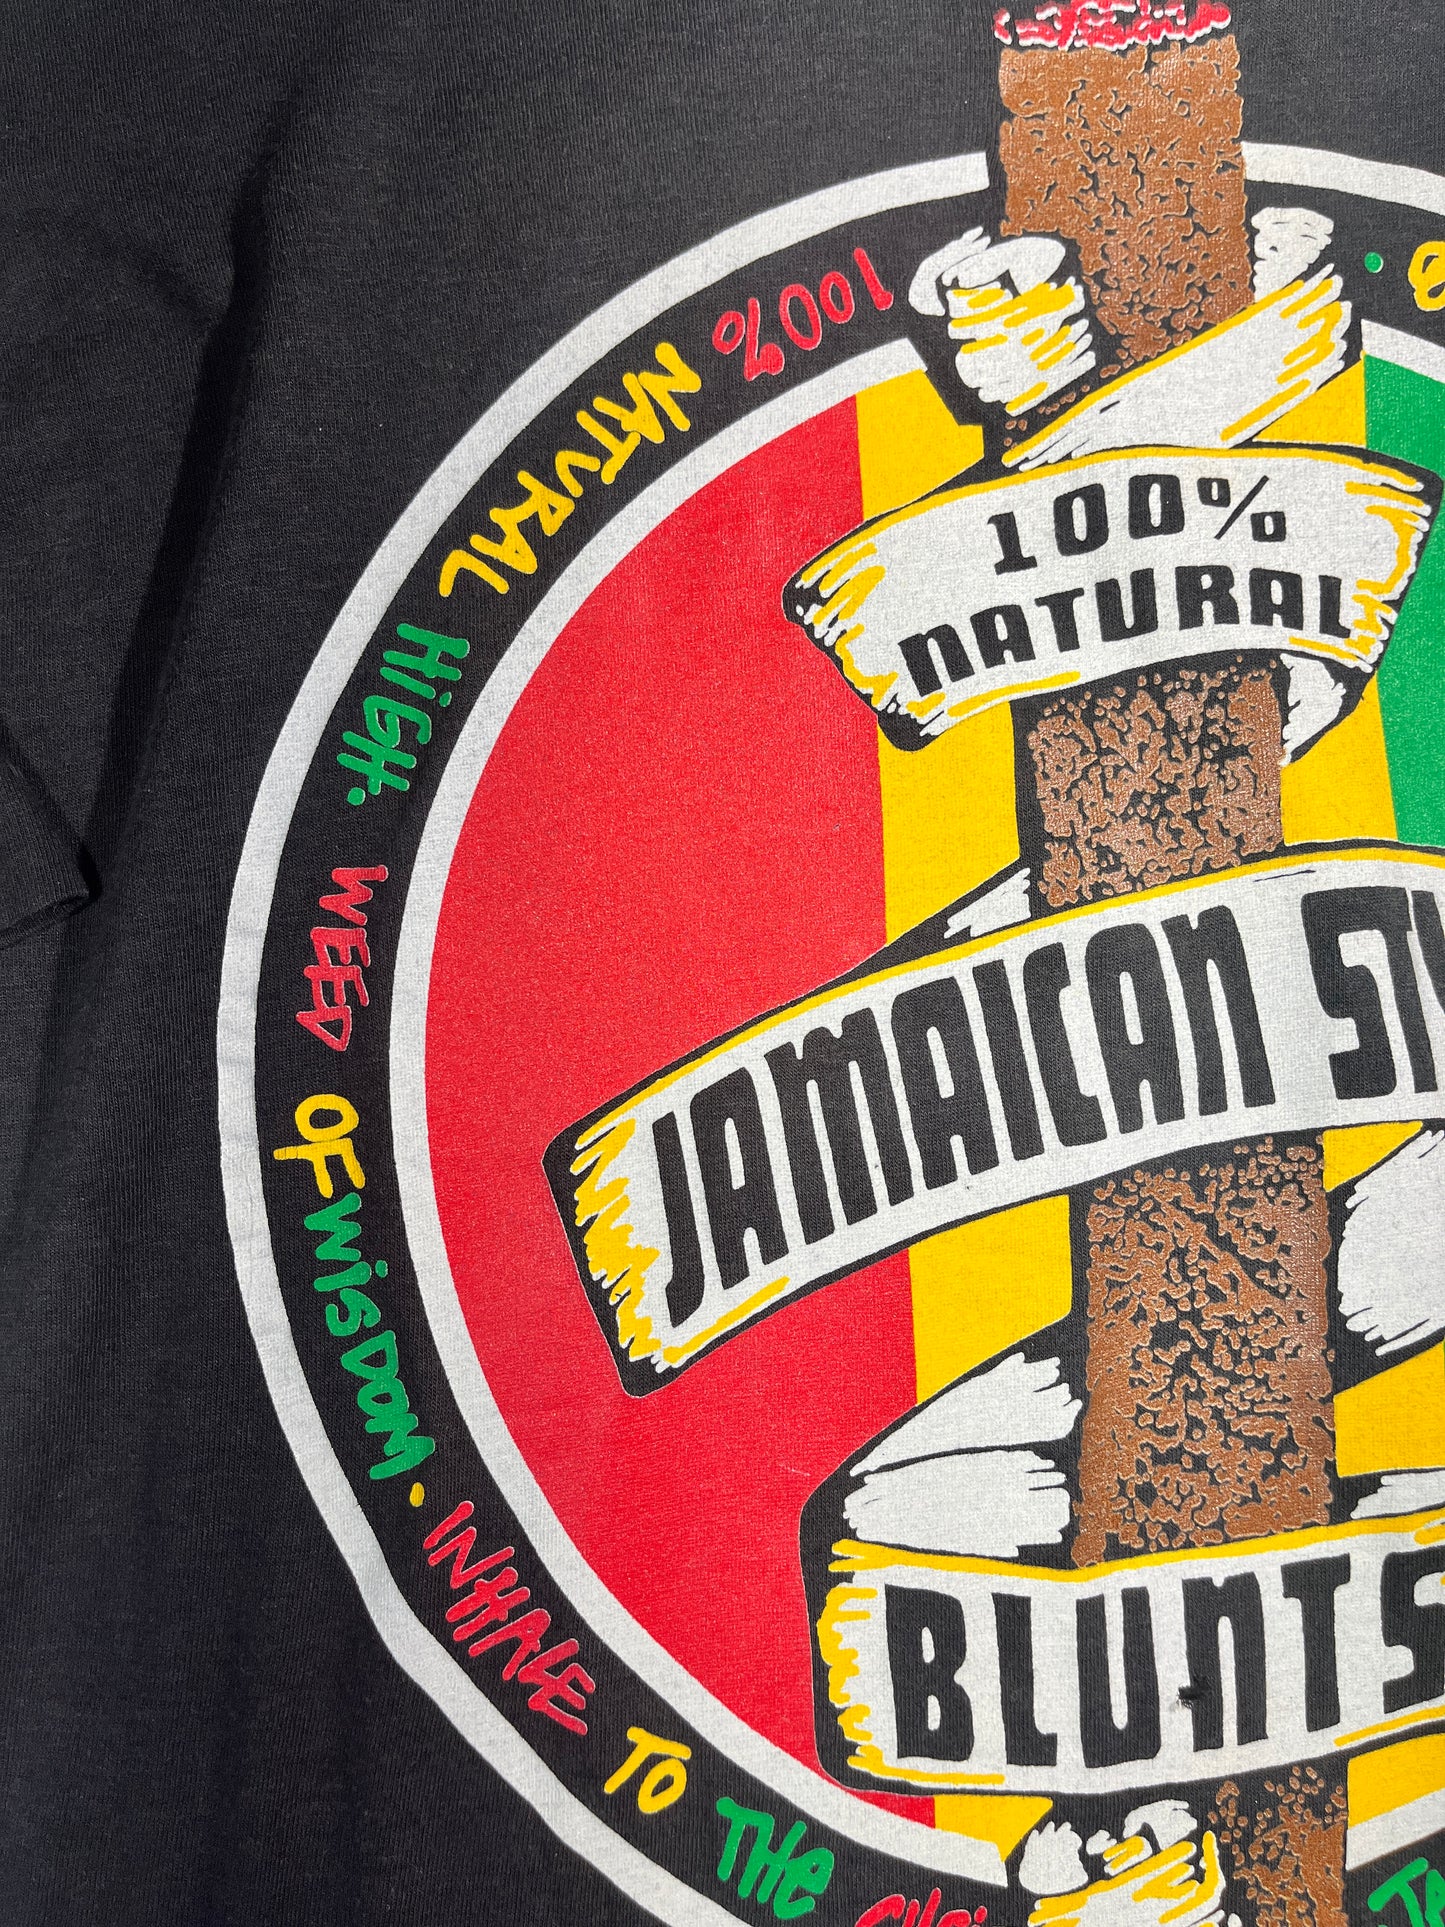 Vintage Blunt T-Shirt 100% Natural Jamaican Style Blunts Weed Irie 1980 Single Stitch Thin